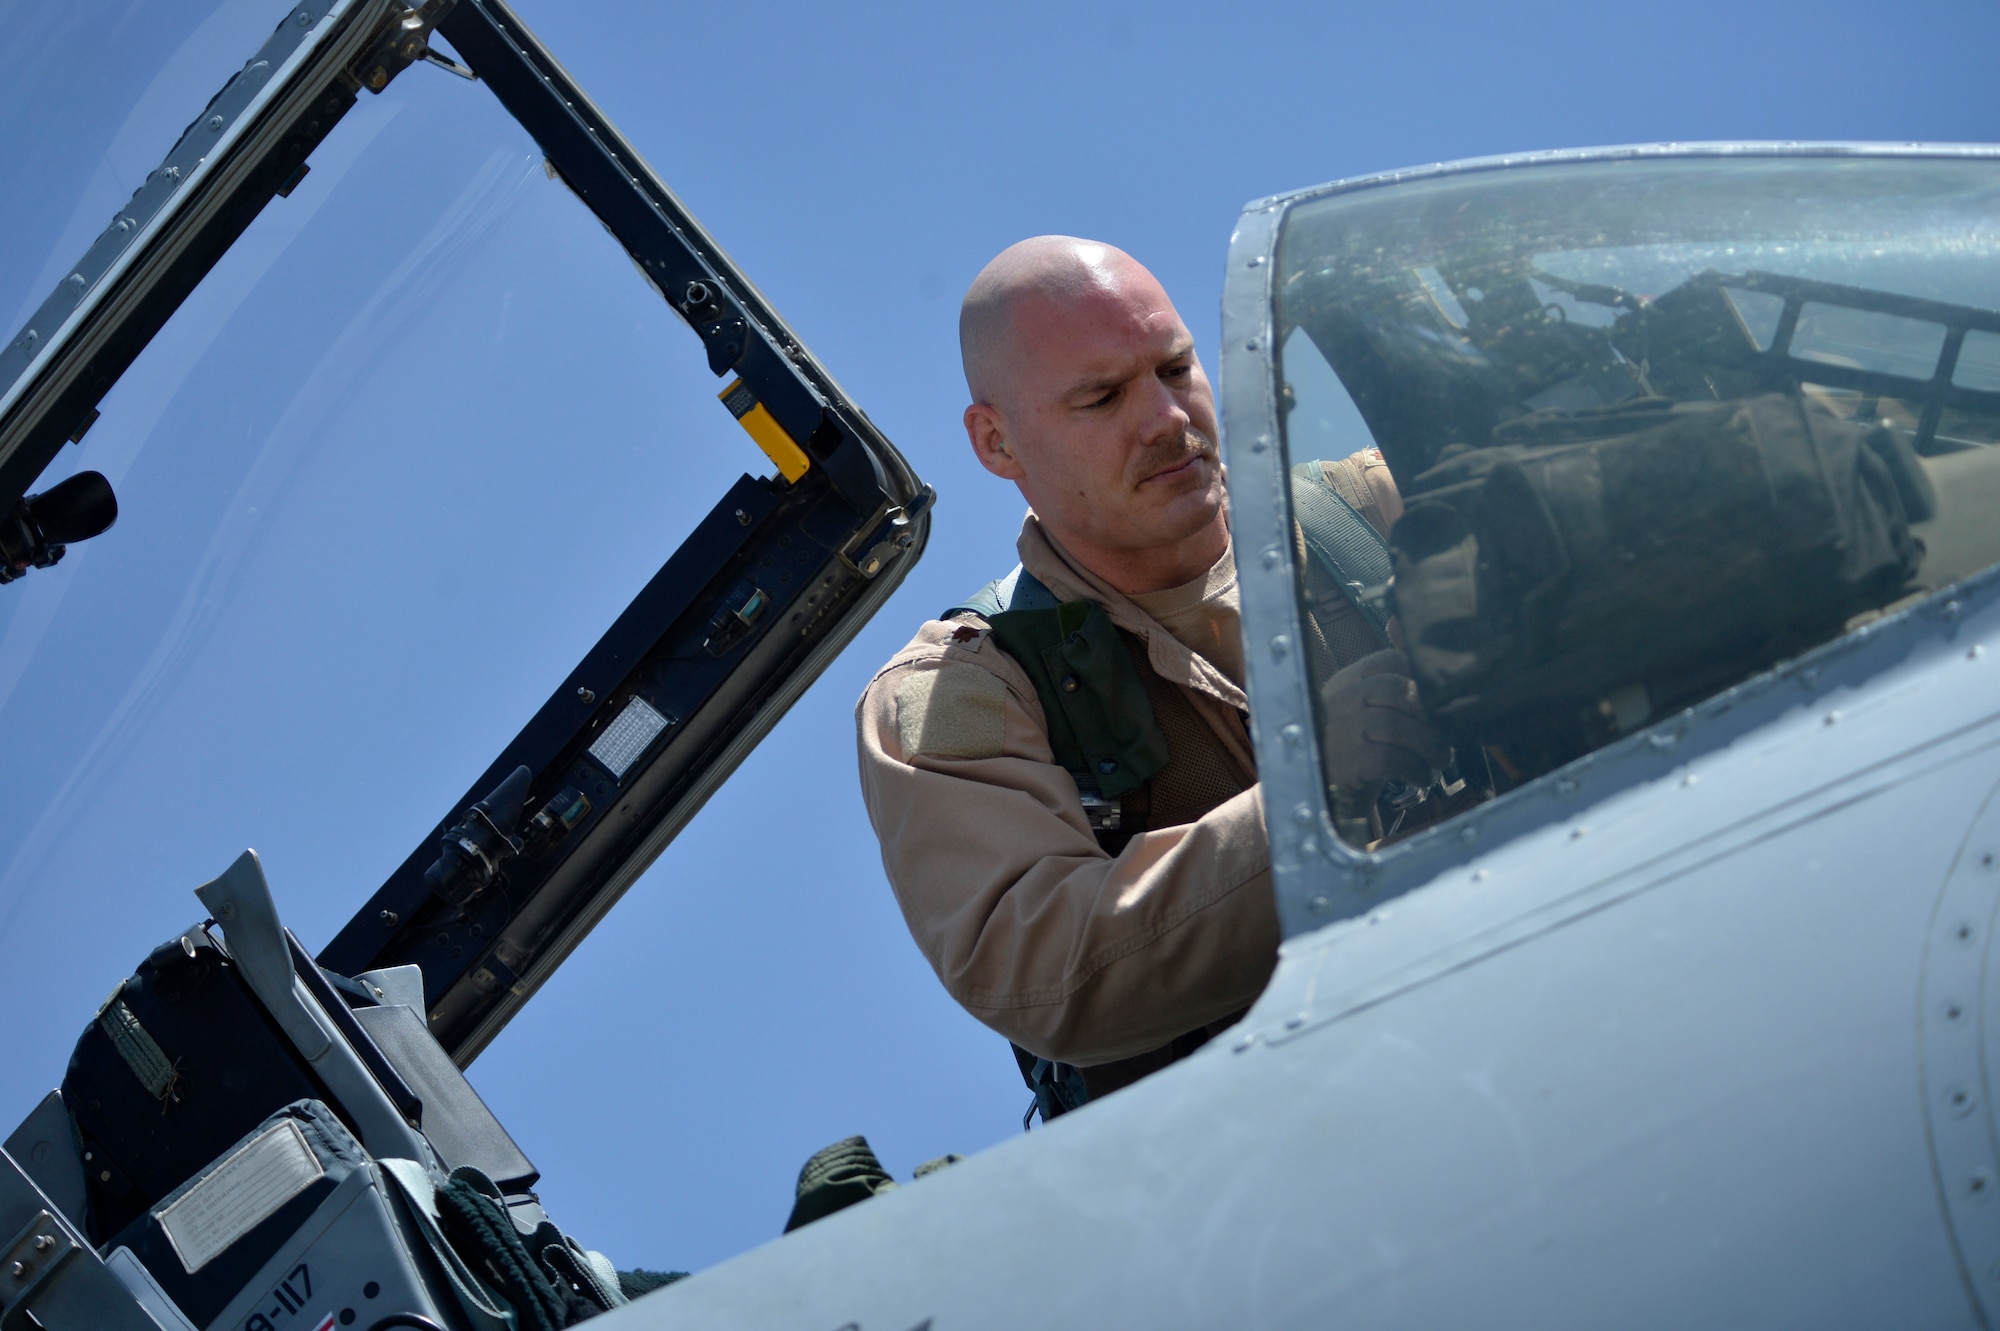 U.S. Air Force Maj. Vincent Sherer, 455th Air Expeditionary Wing pilot, prepares for a sortie at Bagram Airfield, Afghanistan Aug. 5, 2014.  Sherer flies the A-10 Thunderbolt II, a specialized ground-attack aircraft that provides close air support to ground forces operating in Afghanistan.  He is deployed from Davis-Monthan Air Force Base, Ariz. and a native of Portland, Ore. (U.S. Air Force photo by Staff Sgt. Evelyn Chavez/Released)